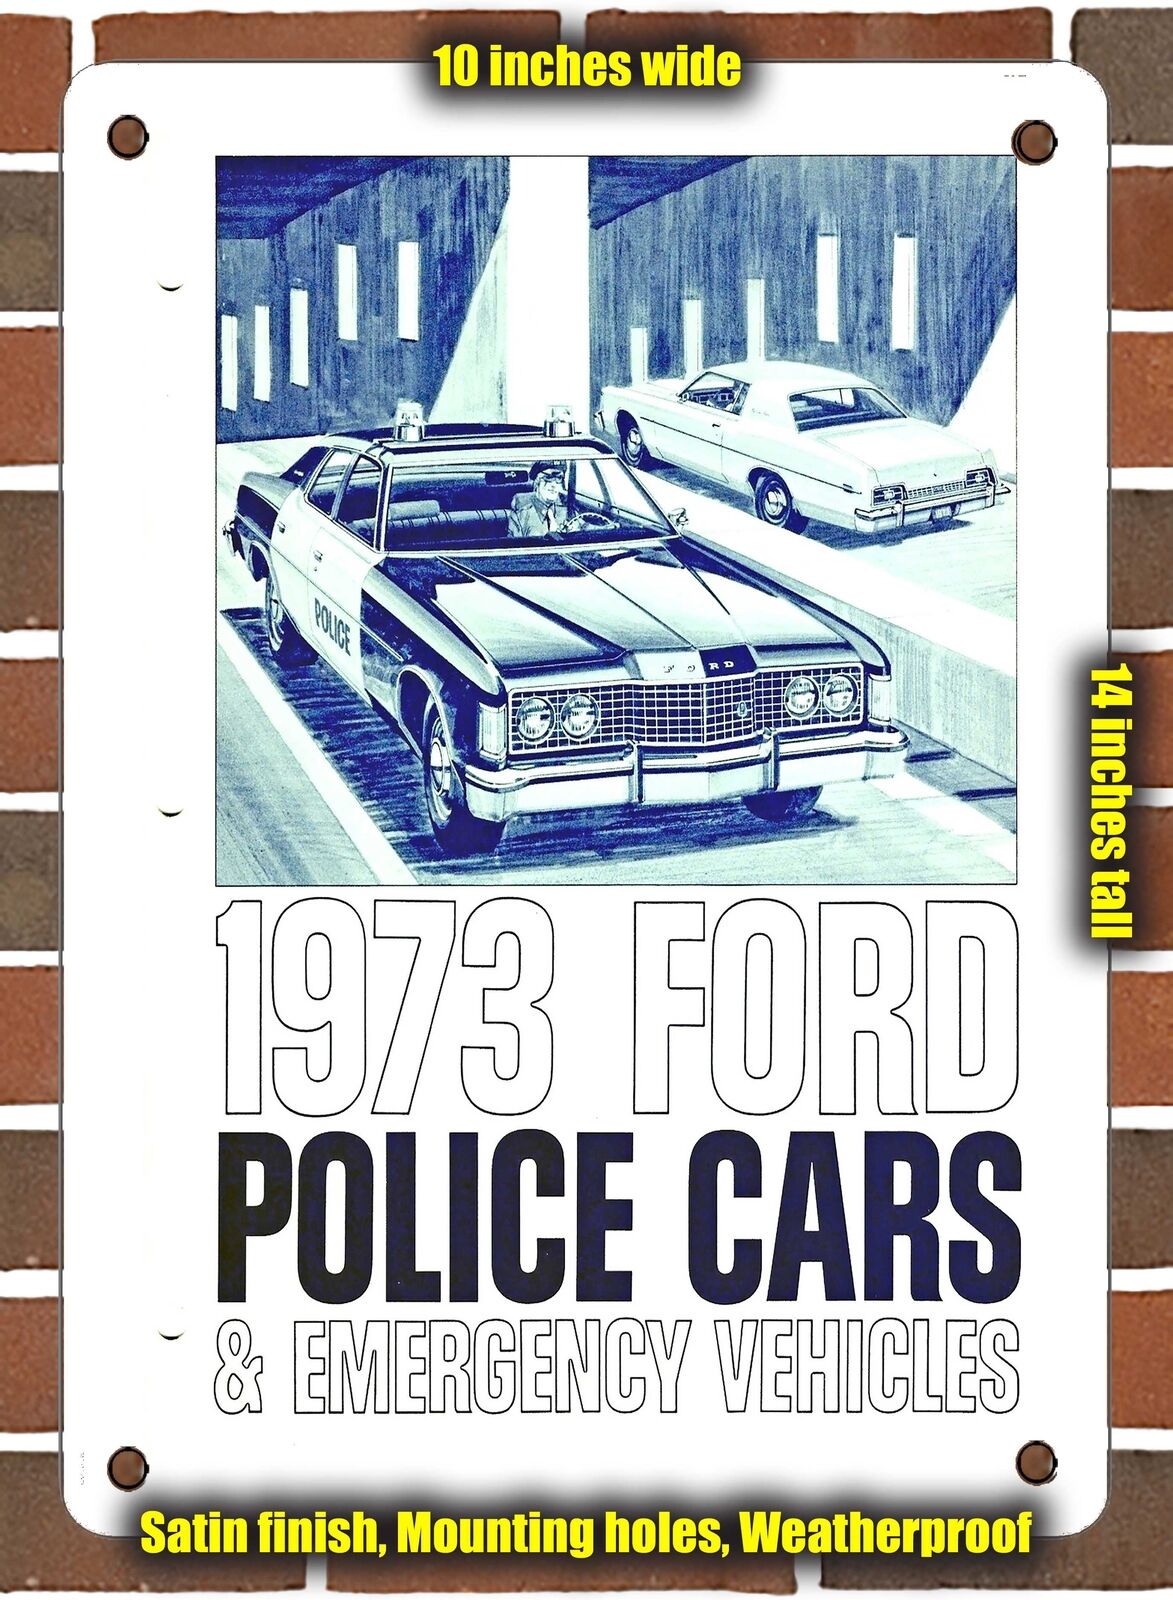 METAL SIGN - 1973 Police Cars Emergency Vehicles - 10x14 Inches